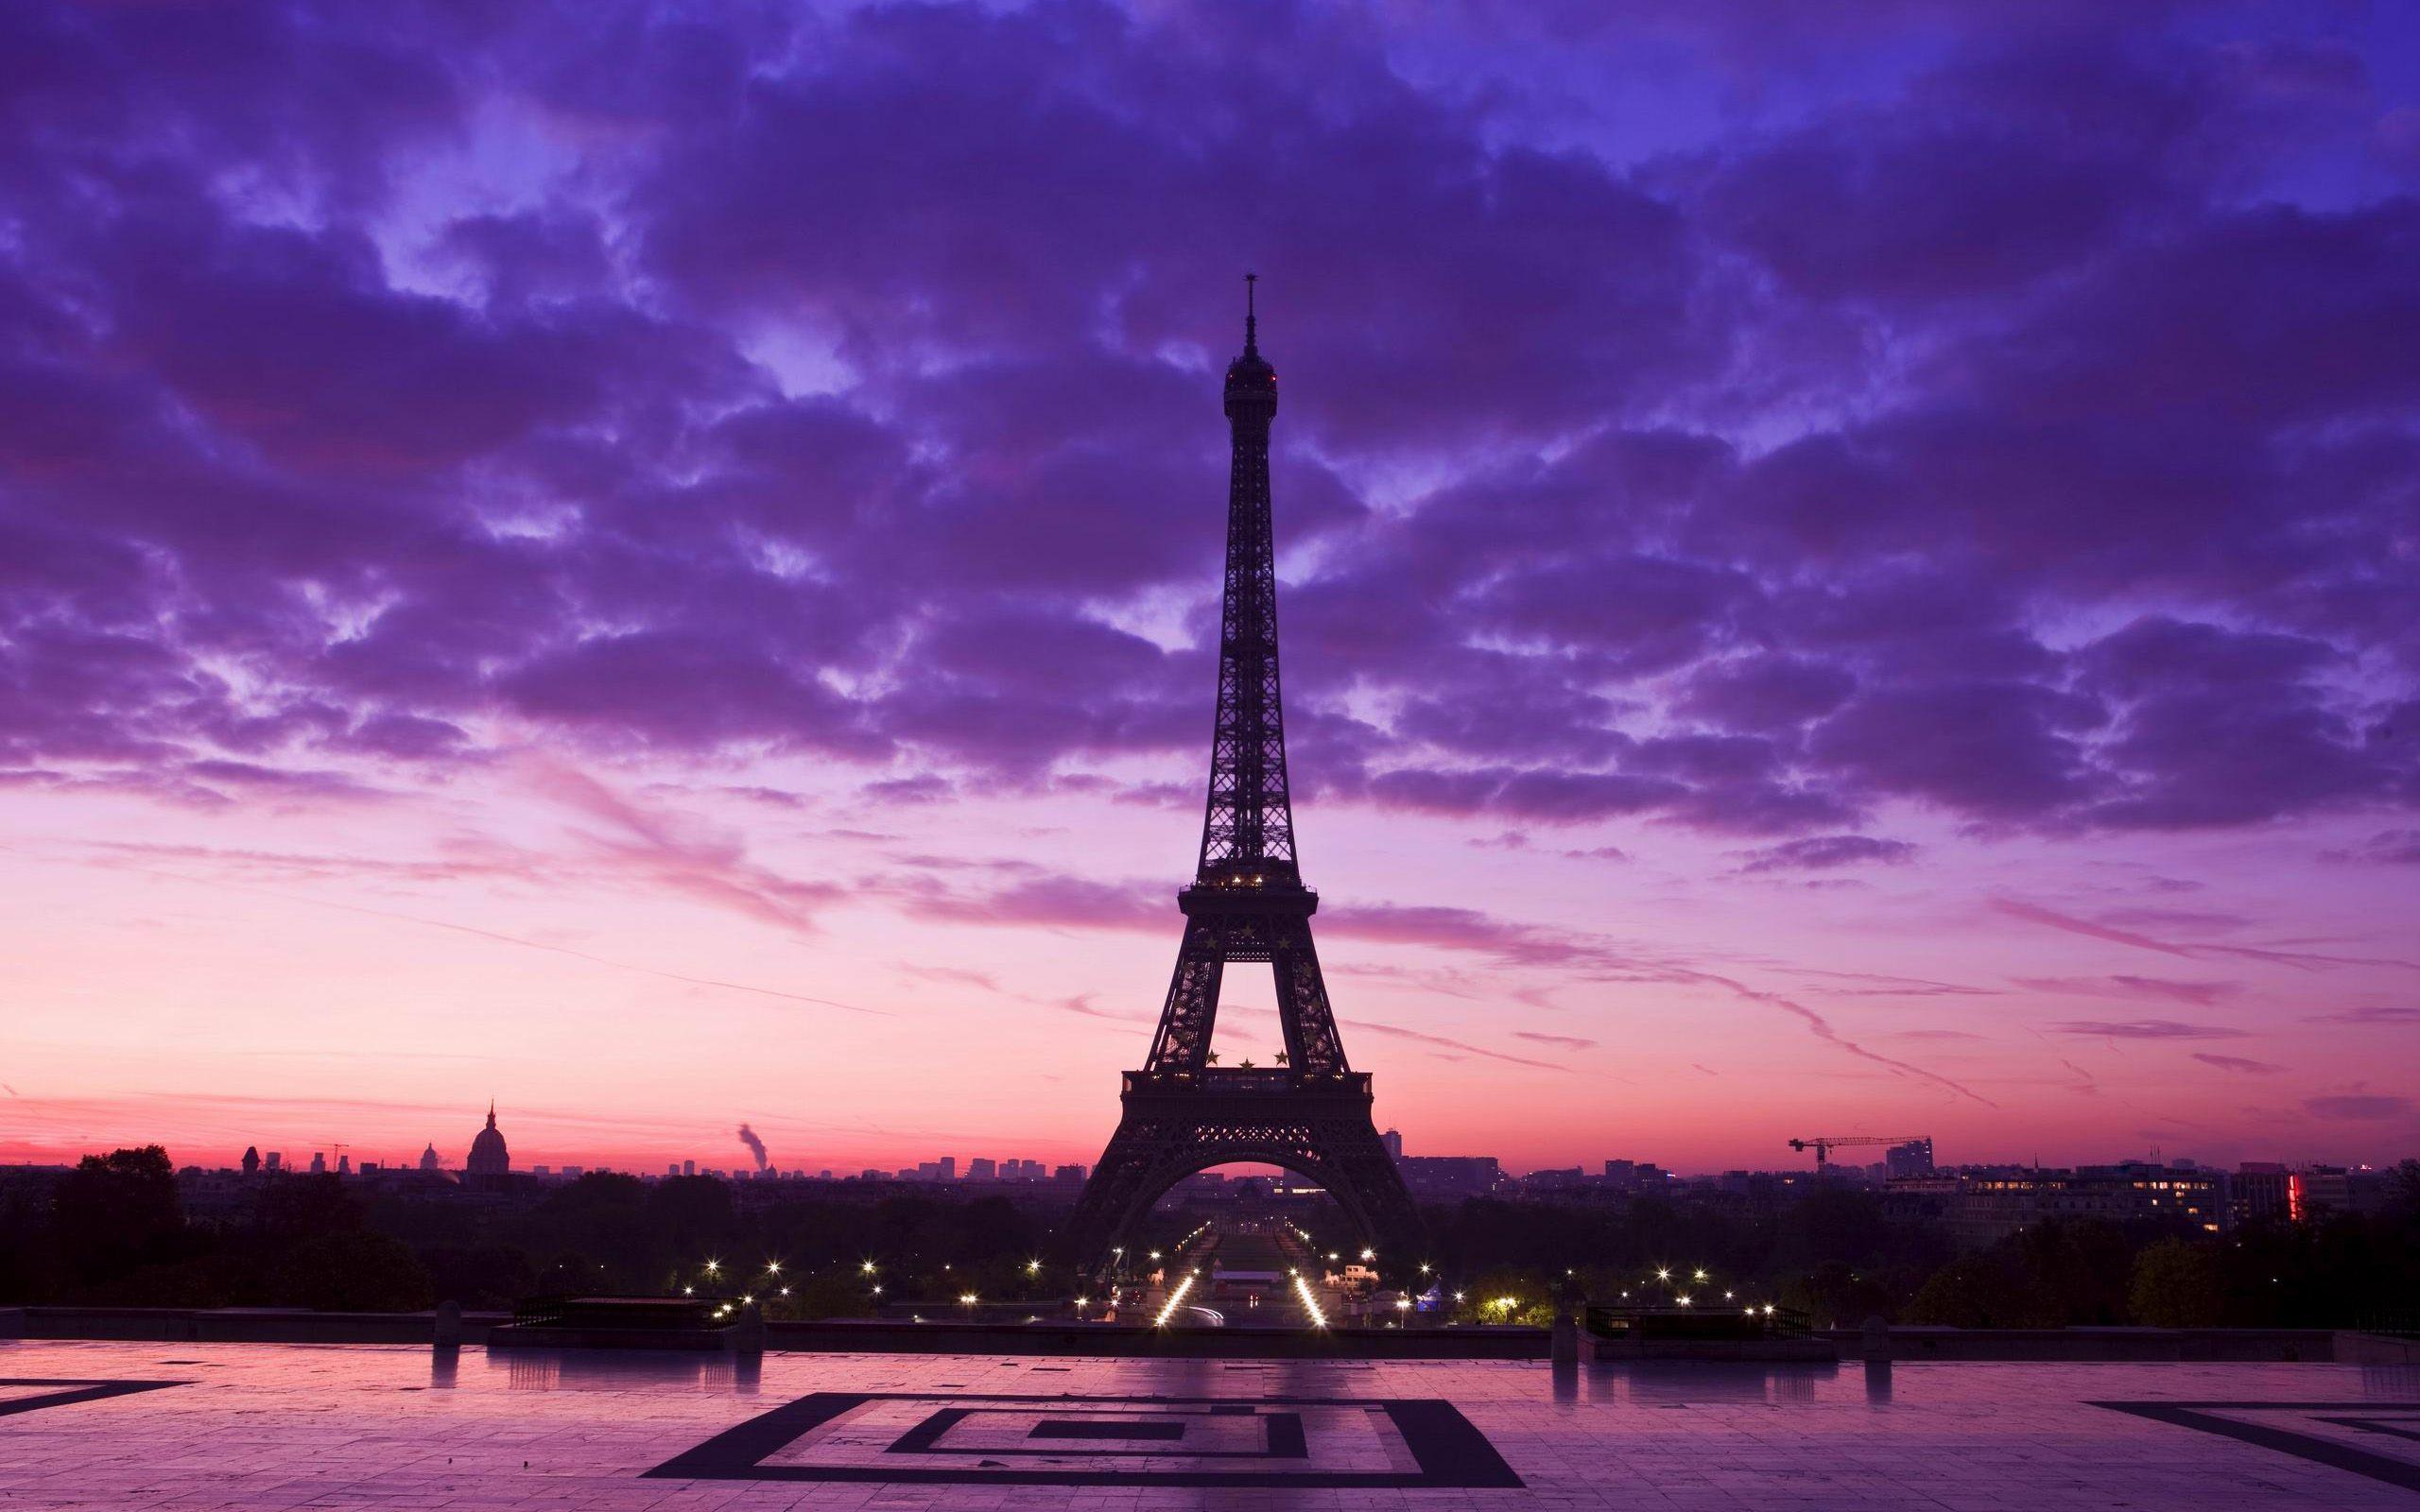 Download Awesome Paris Wallpaper 22117 2560x1600 px High